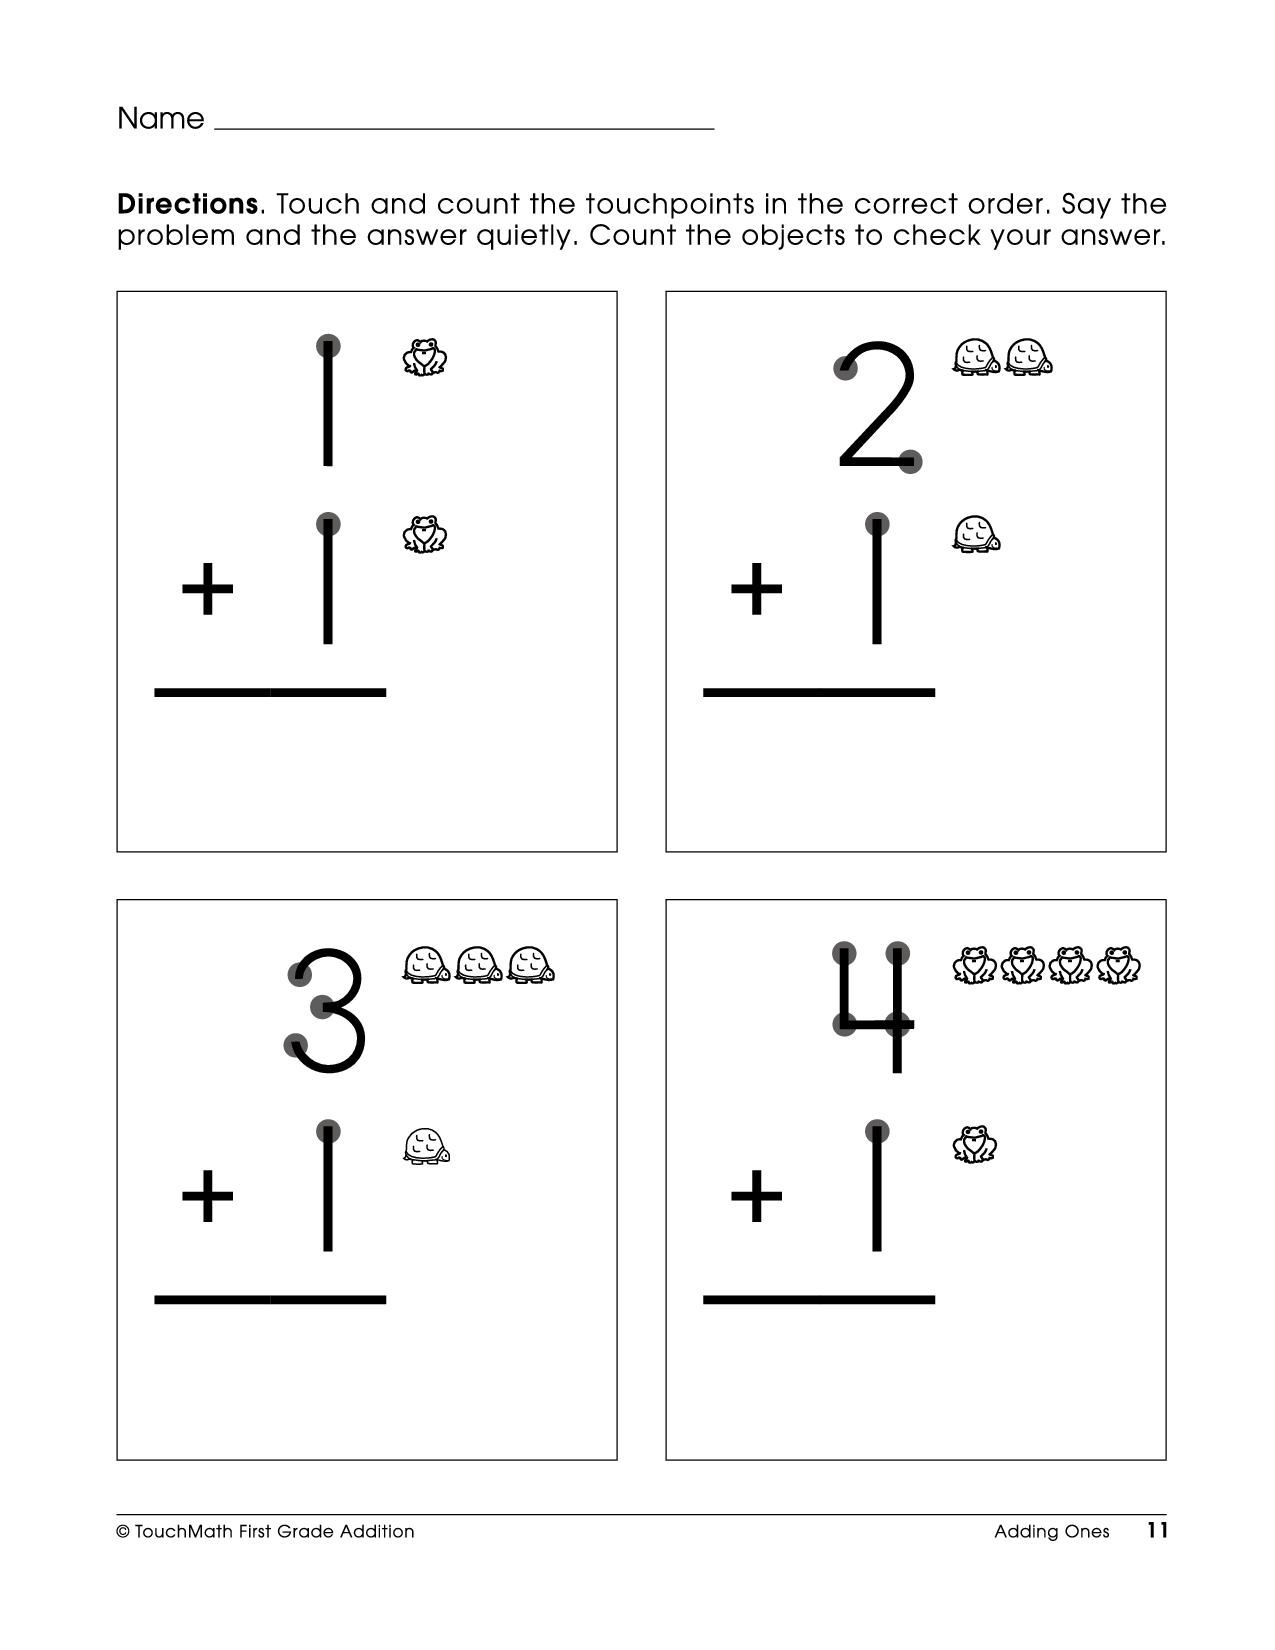 touchpoint-math-worksheets-printable-159-lyana-worksheets